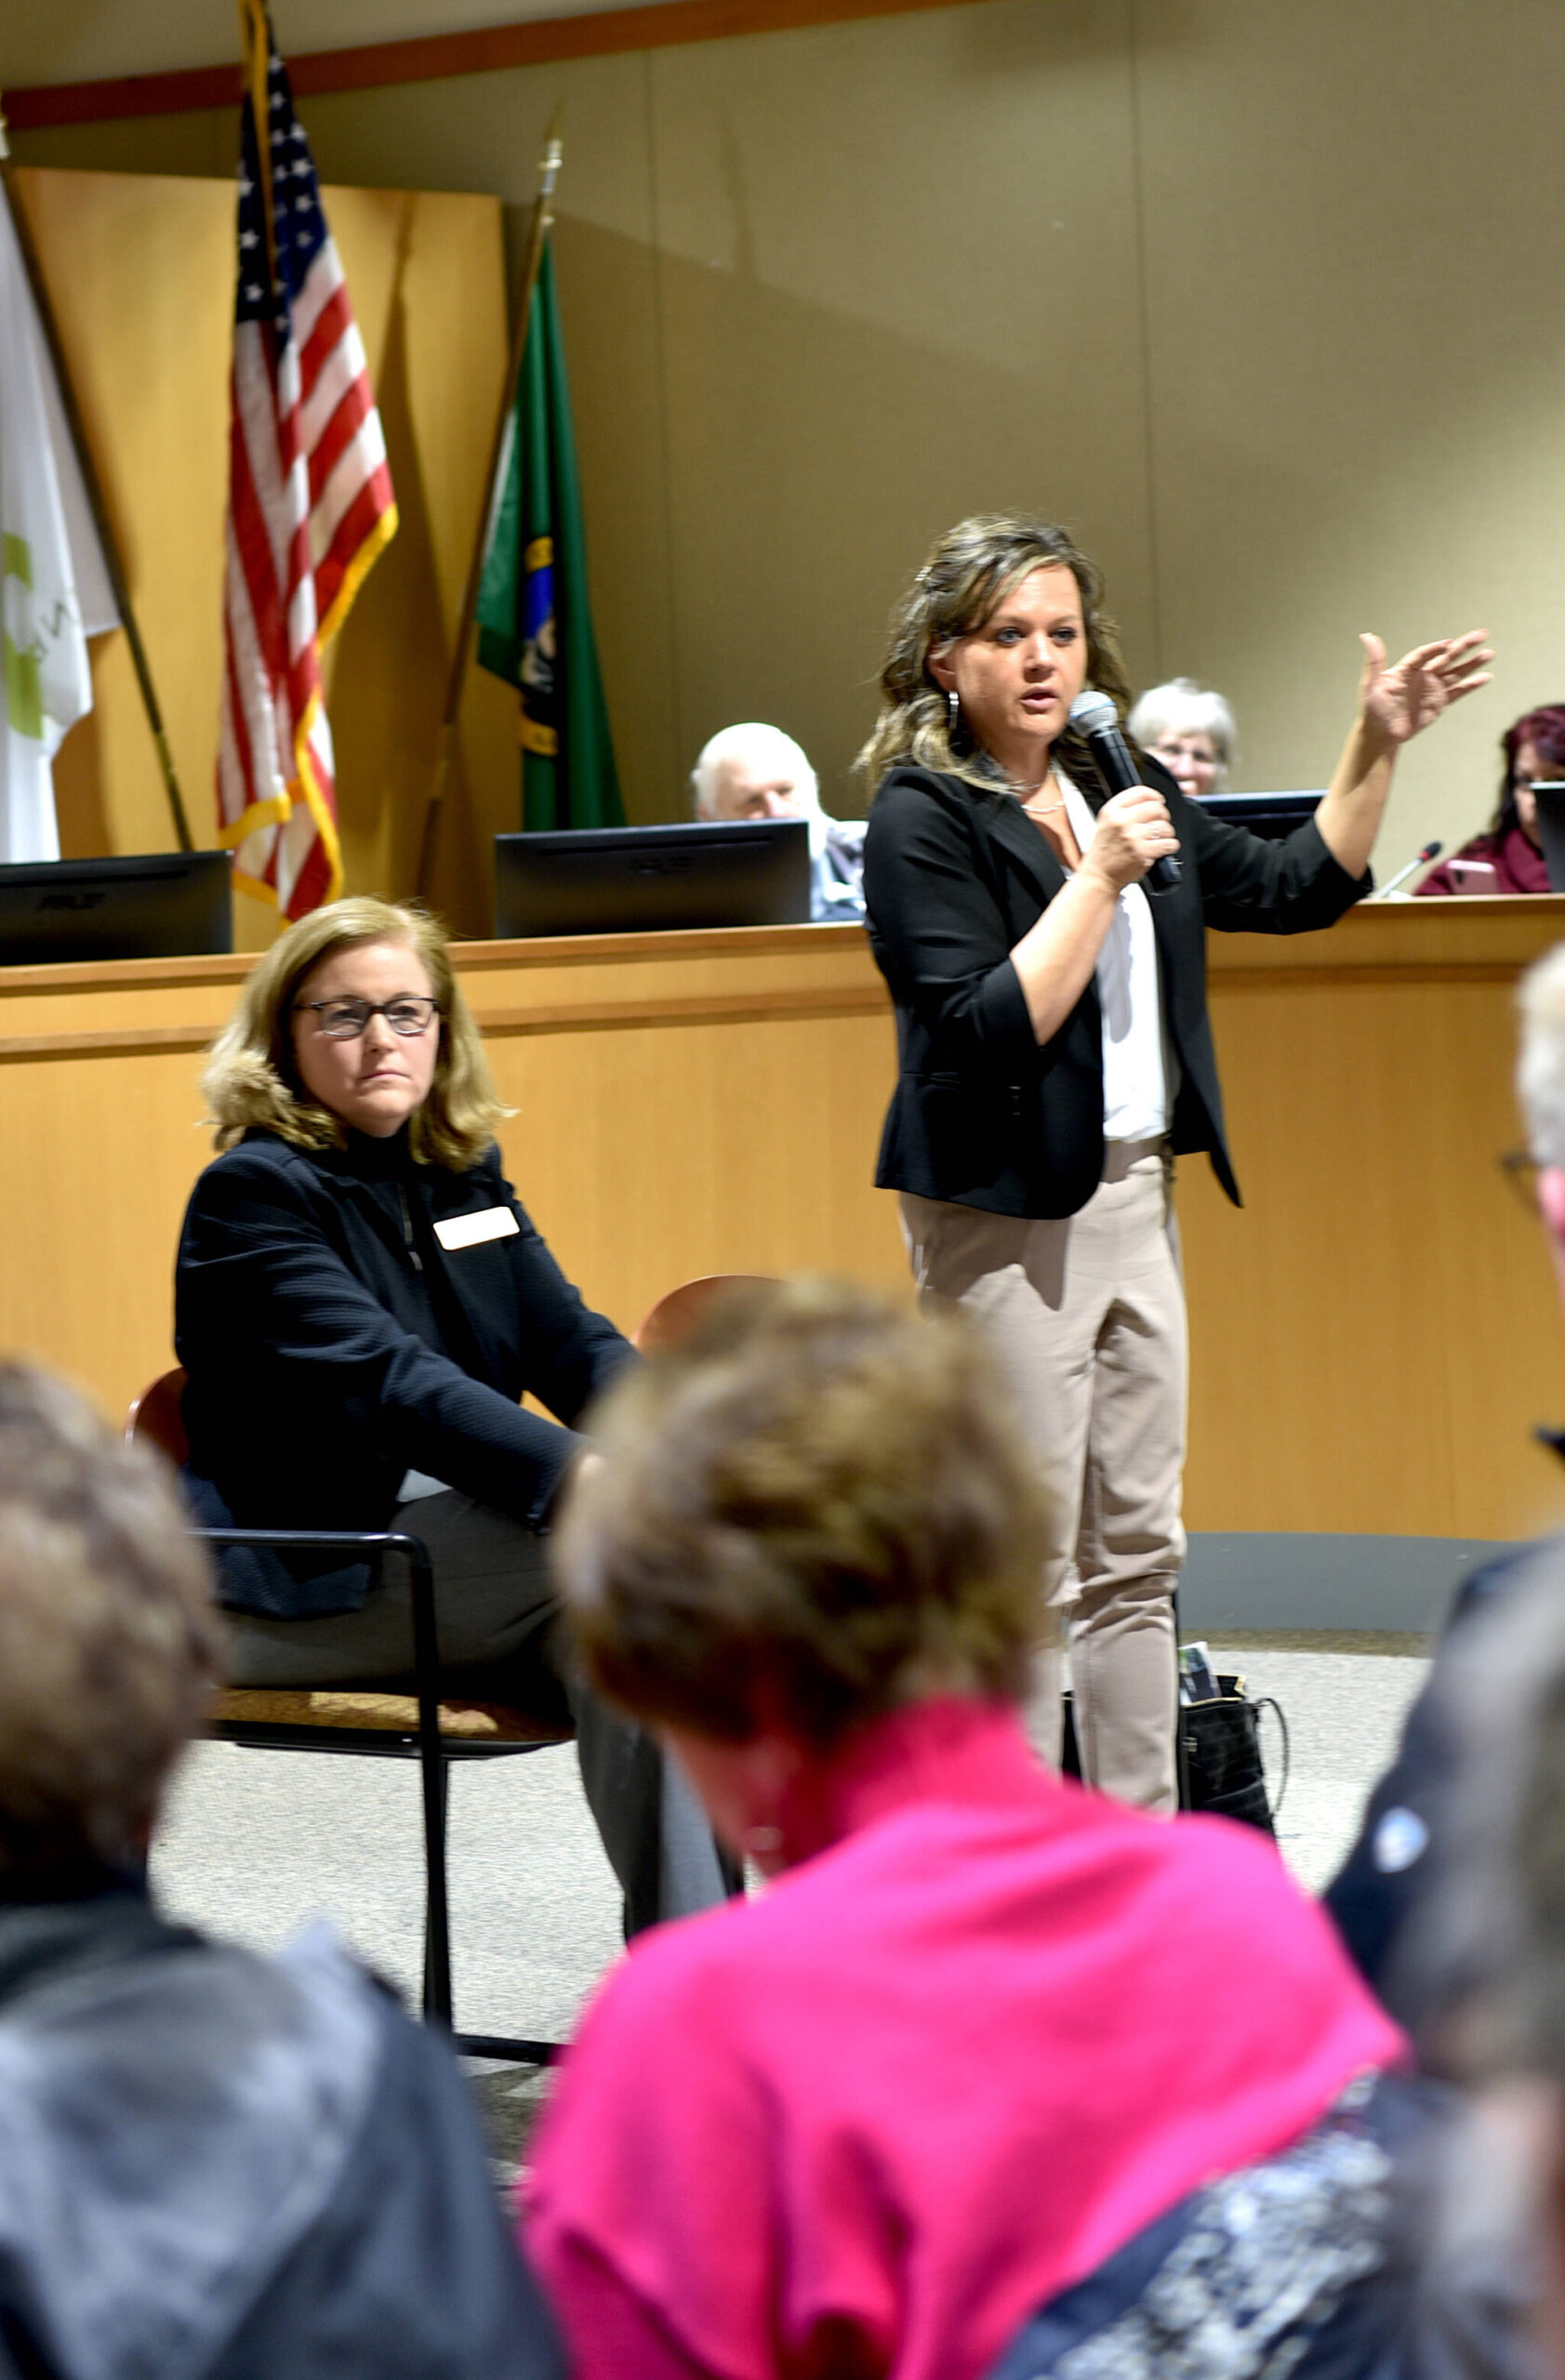 District 23 state legislator Rep. Tarra Simmons answers questions with Sen. Christine Rolfes during a Town Hall meeting with Bainbridge Island residents at City Hall March 11.